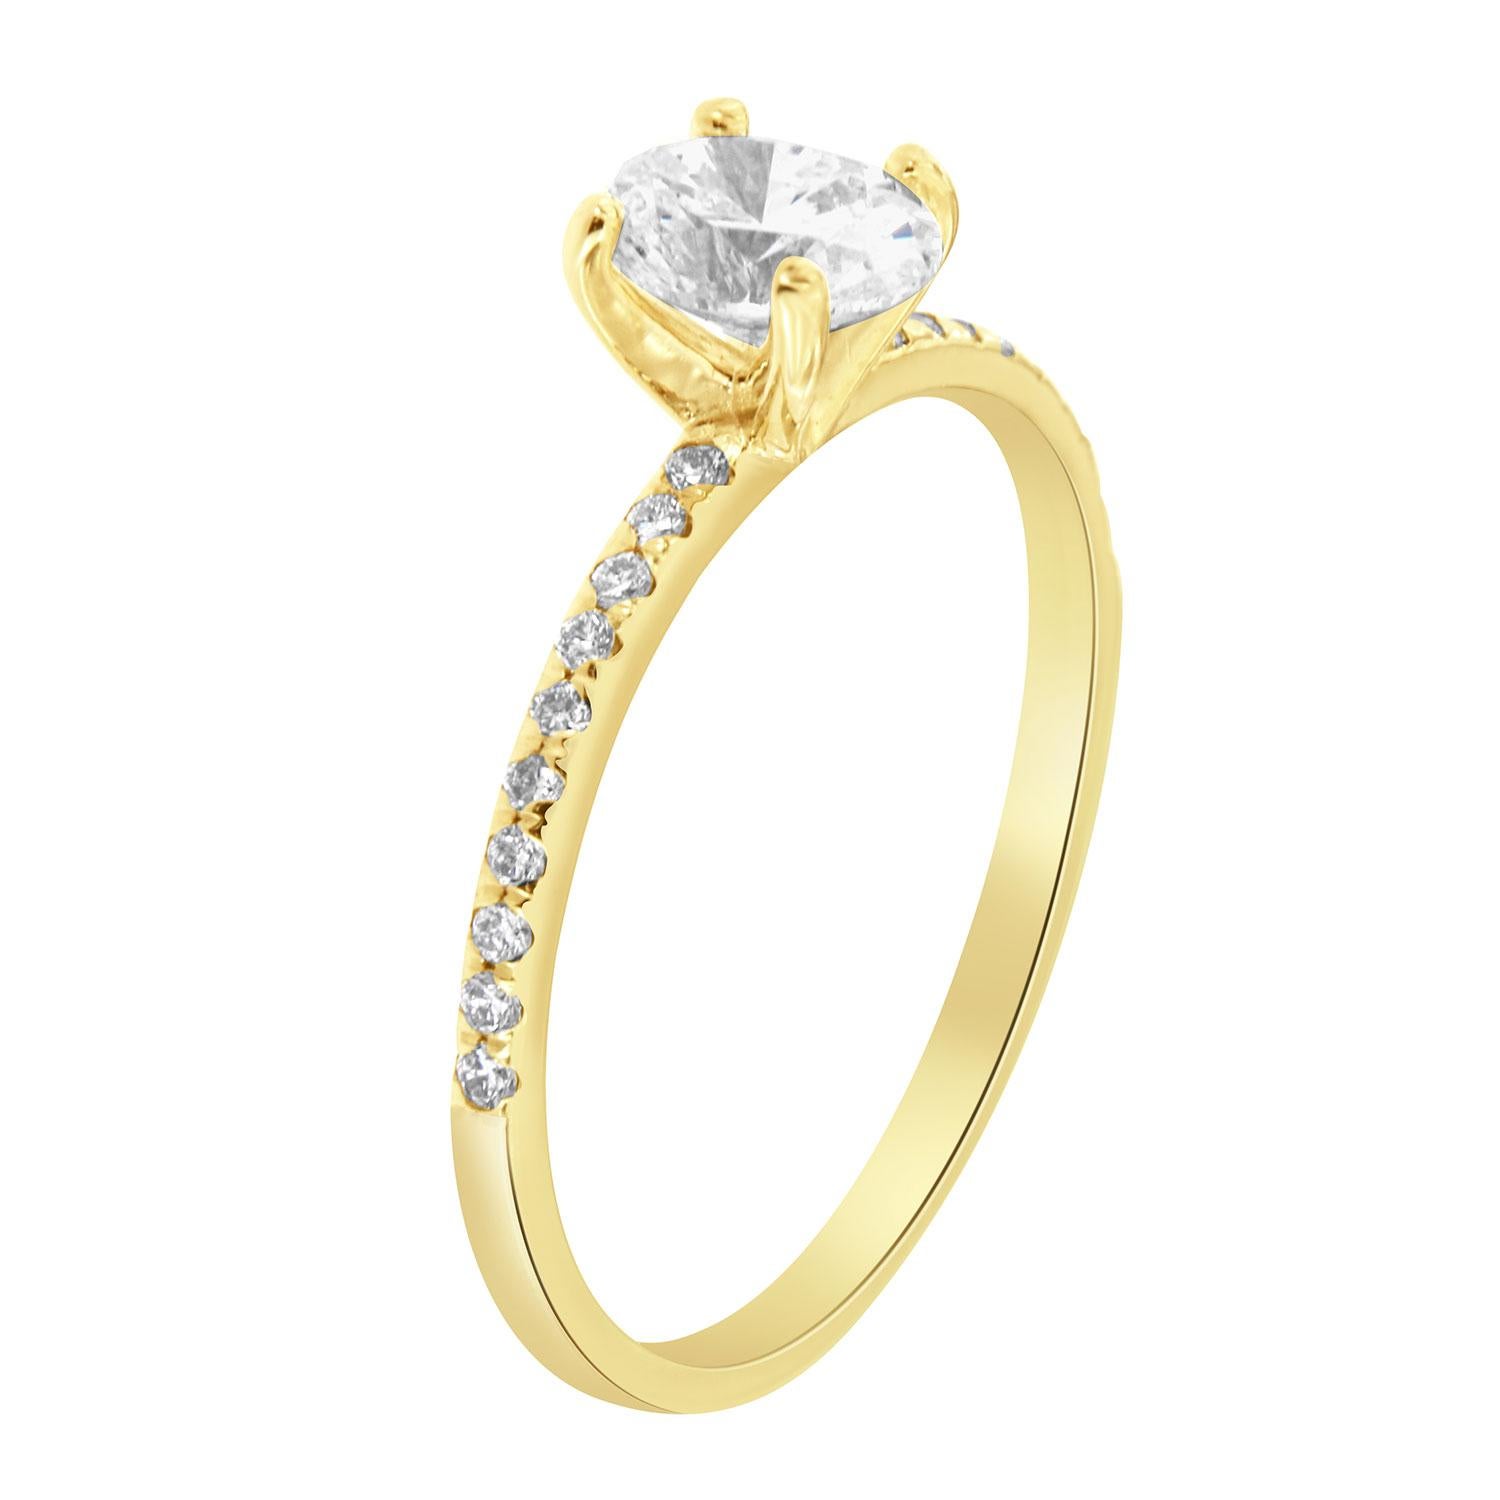 This petite 14k yellow gold ring features twenty (20) brilliant round diamonds Micro-Prong set on a 1.5 mm wide band. In the center of the ring is set one natural diamond GIA certificate 6372461209 as described below:

Shape: Oval
Weight: 0.90